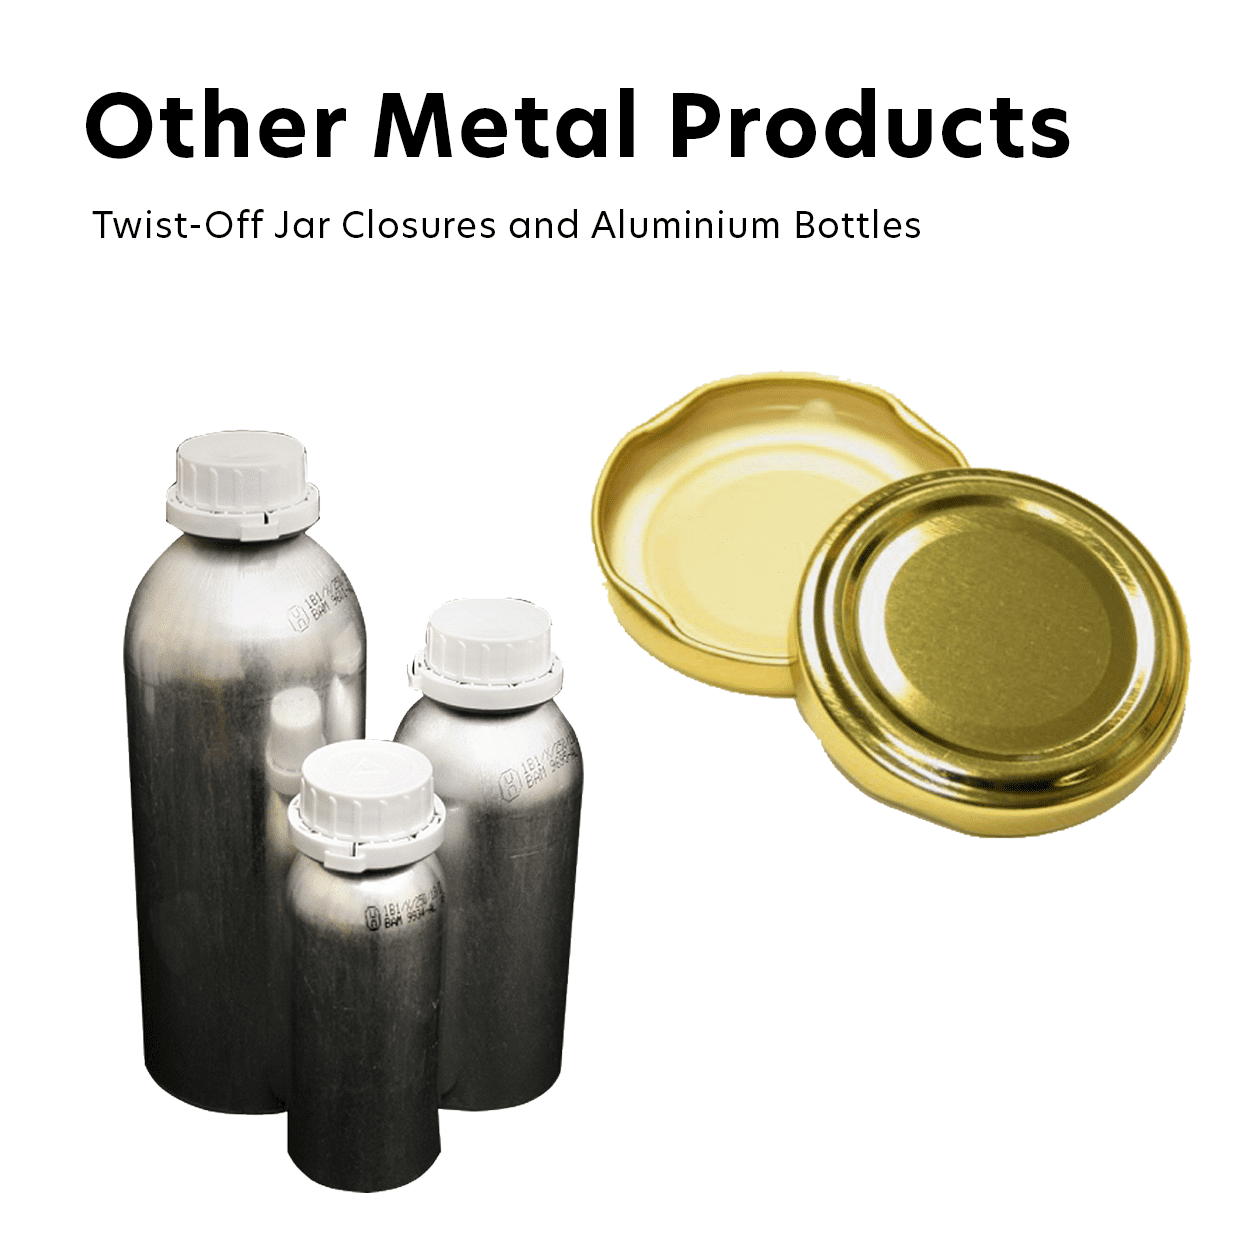 Other Metal Products